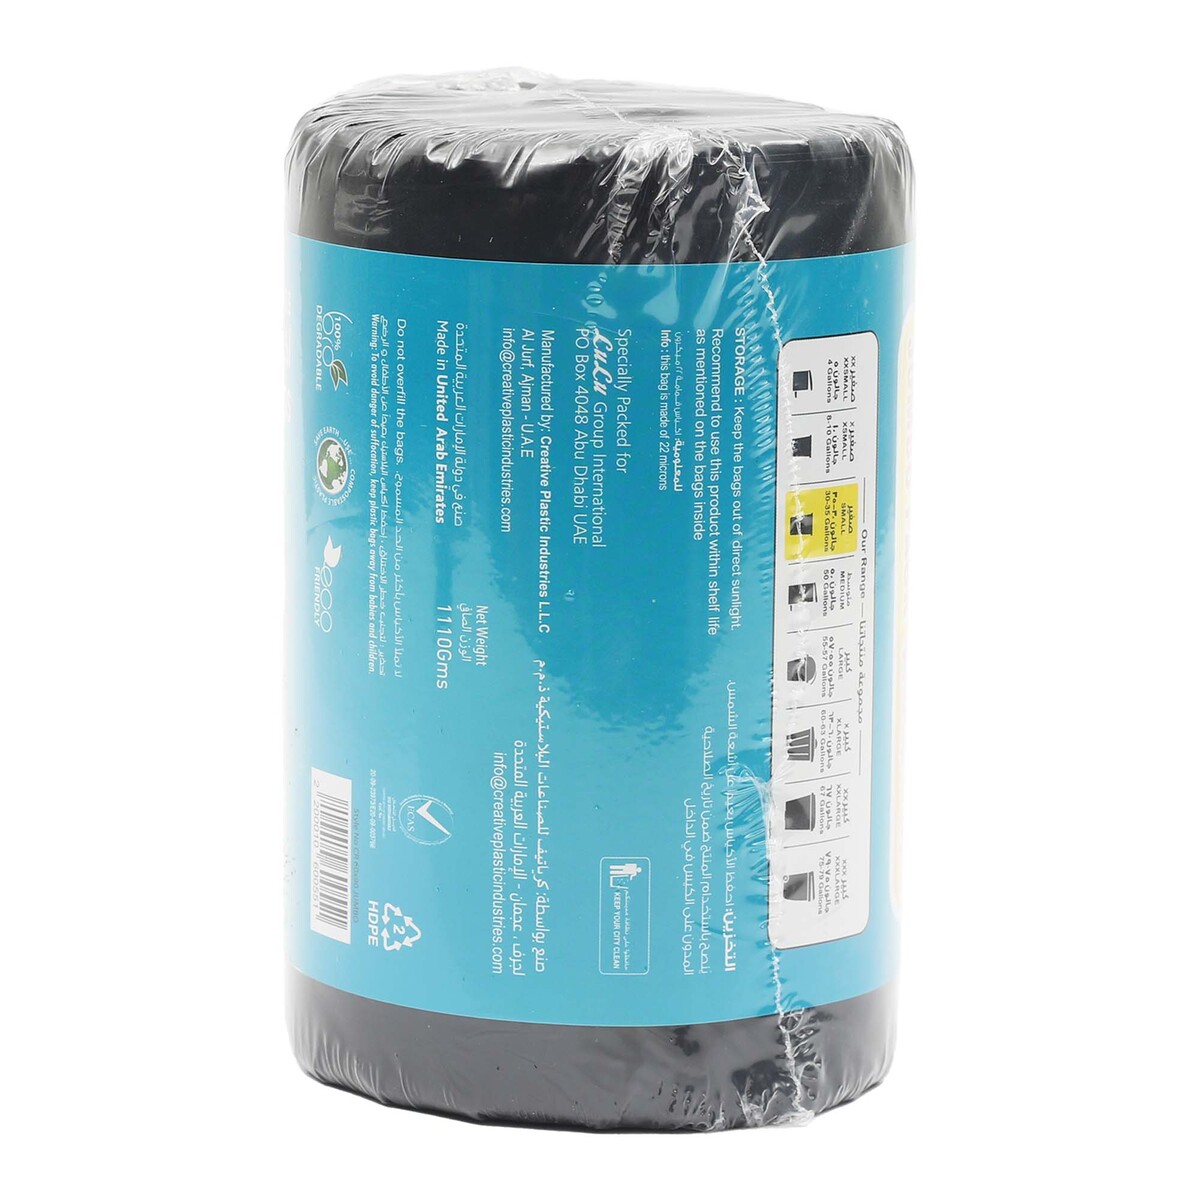 Home Mate Black Biodegradable Garbage Bags Roll  60 x 90cm 30 Gallons Jumbo Pack 50pcs